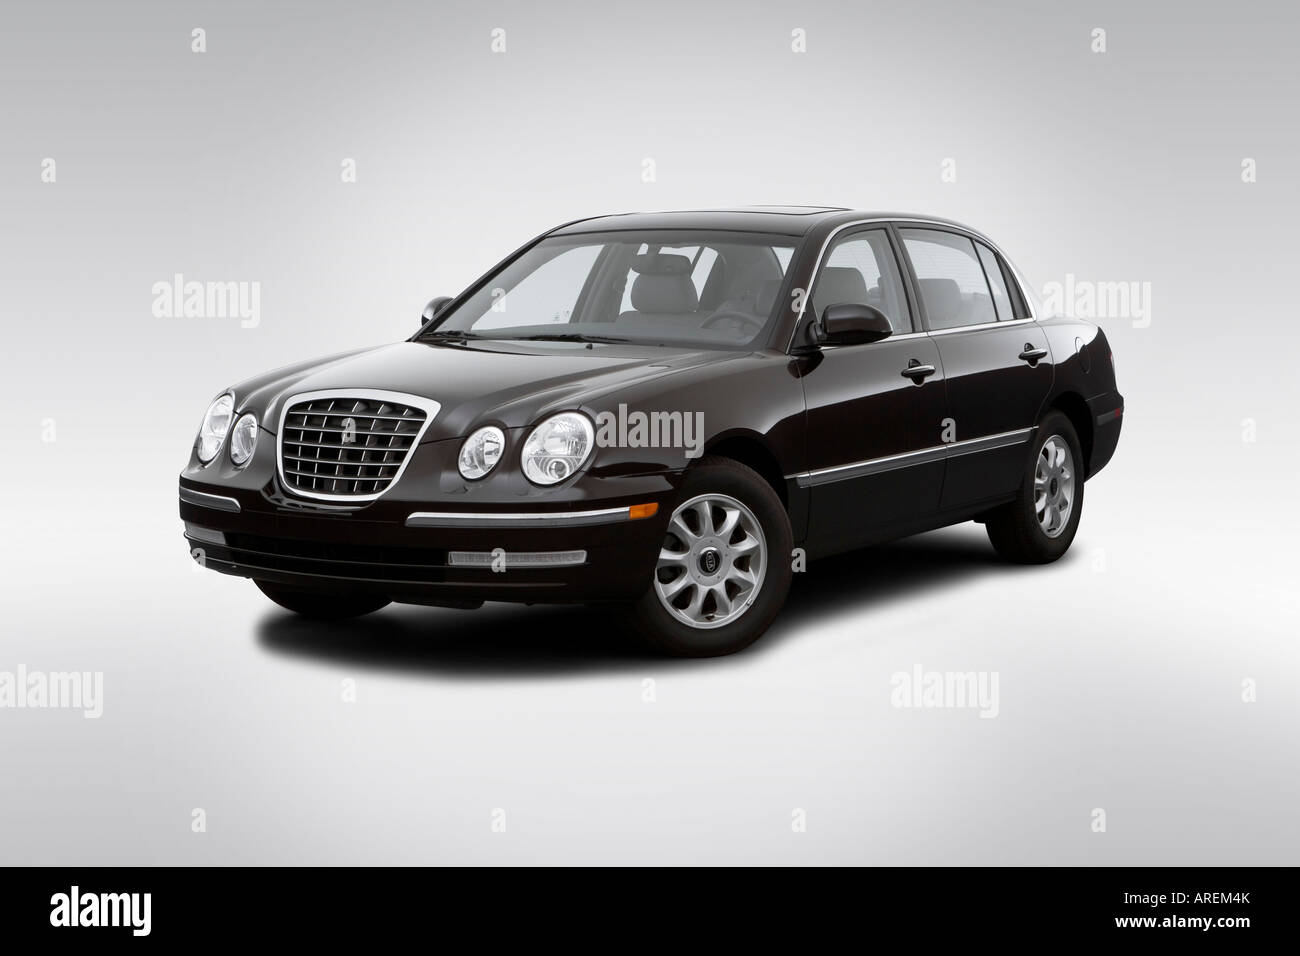 2006 Kia Amanti in Red - Front angle view Stock Photo - Alamy